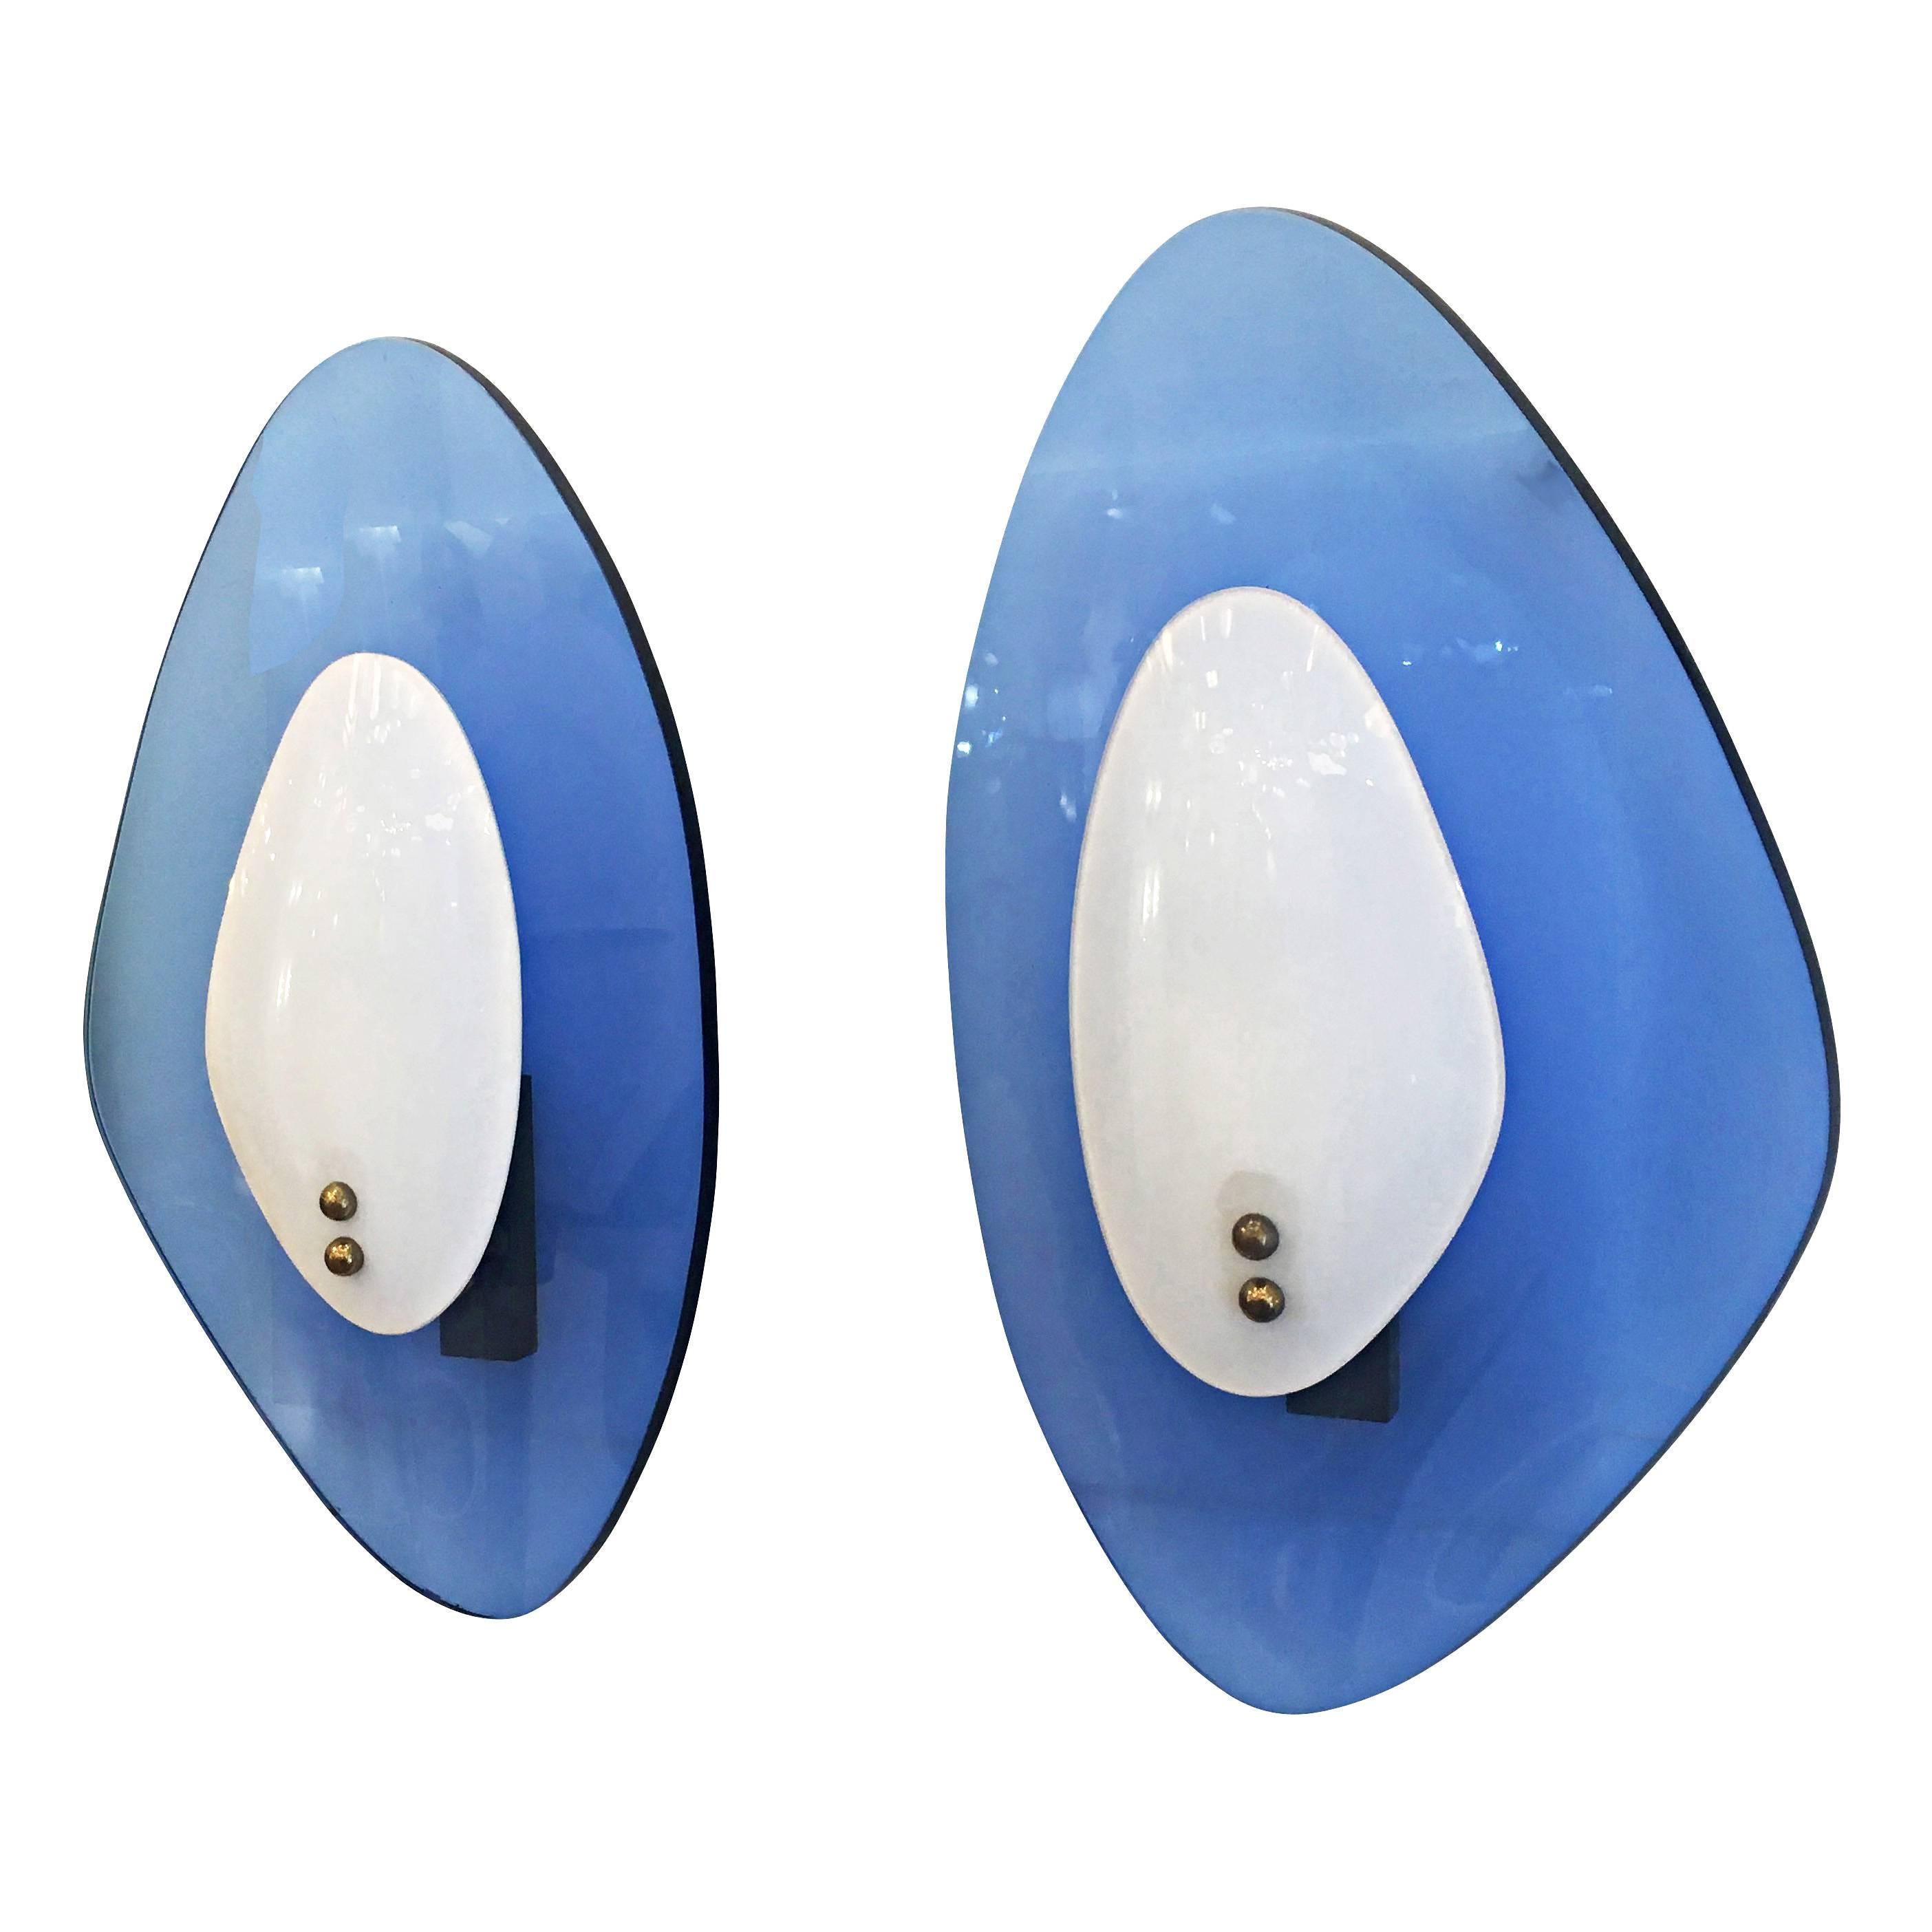 Pair of midcentury sconces by Cristal Arte composed of two contoured glass shades. The back shade is blue while the front one is white. Hardware holding one candelabra socket is brass.

Condition: Excellent vintage condition, minor wear consistent